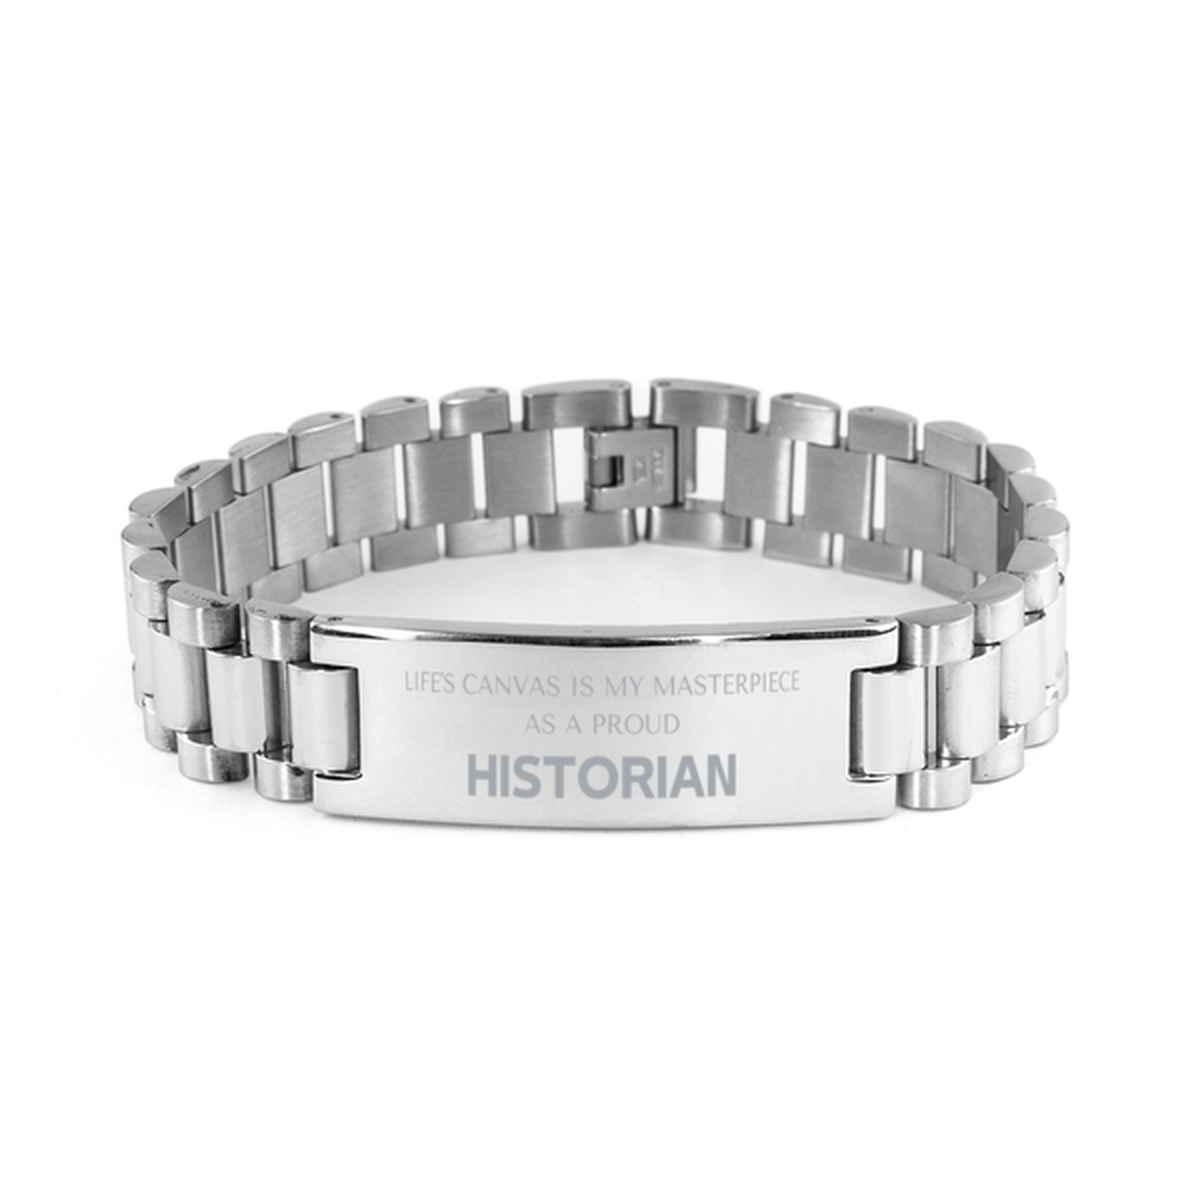 Proud Historian Gifts, Life's canvas is my masterpiece, Epic Birthday Christmas Unique Ladder Stainless Steel Bracelet For Historian, Coworkers, Men, Women, Friends